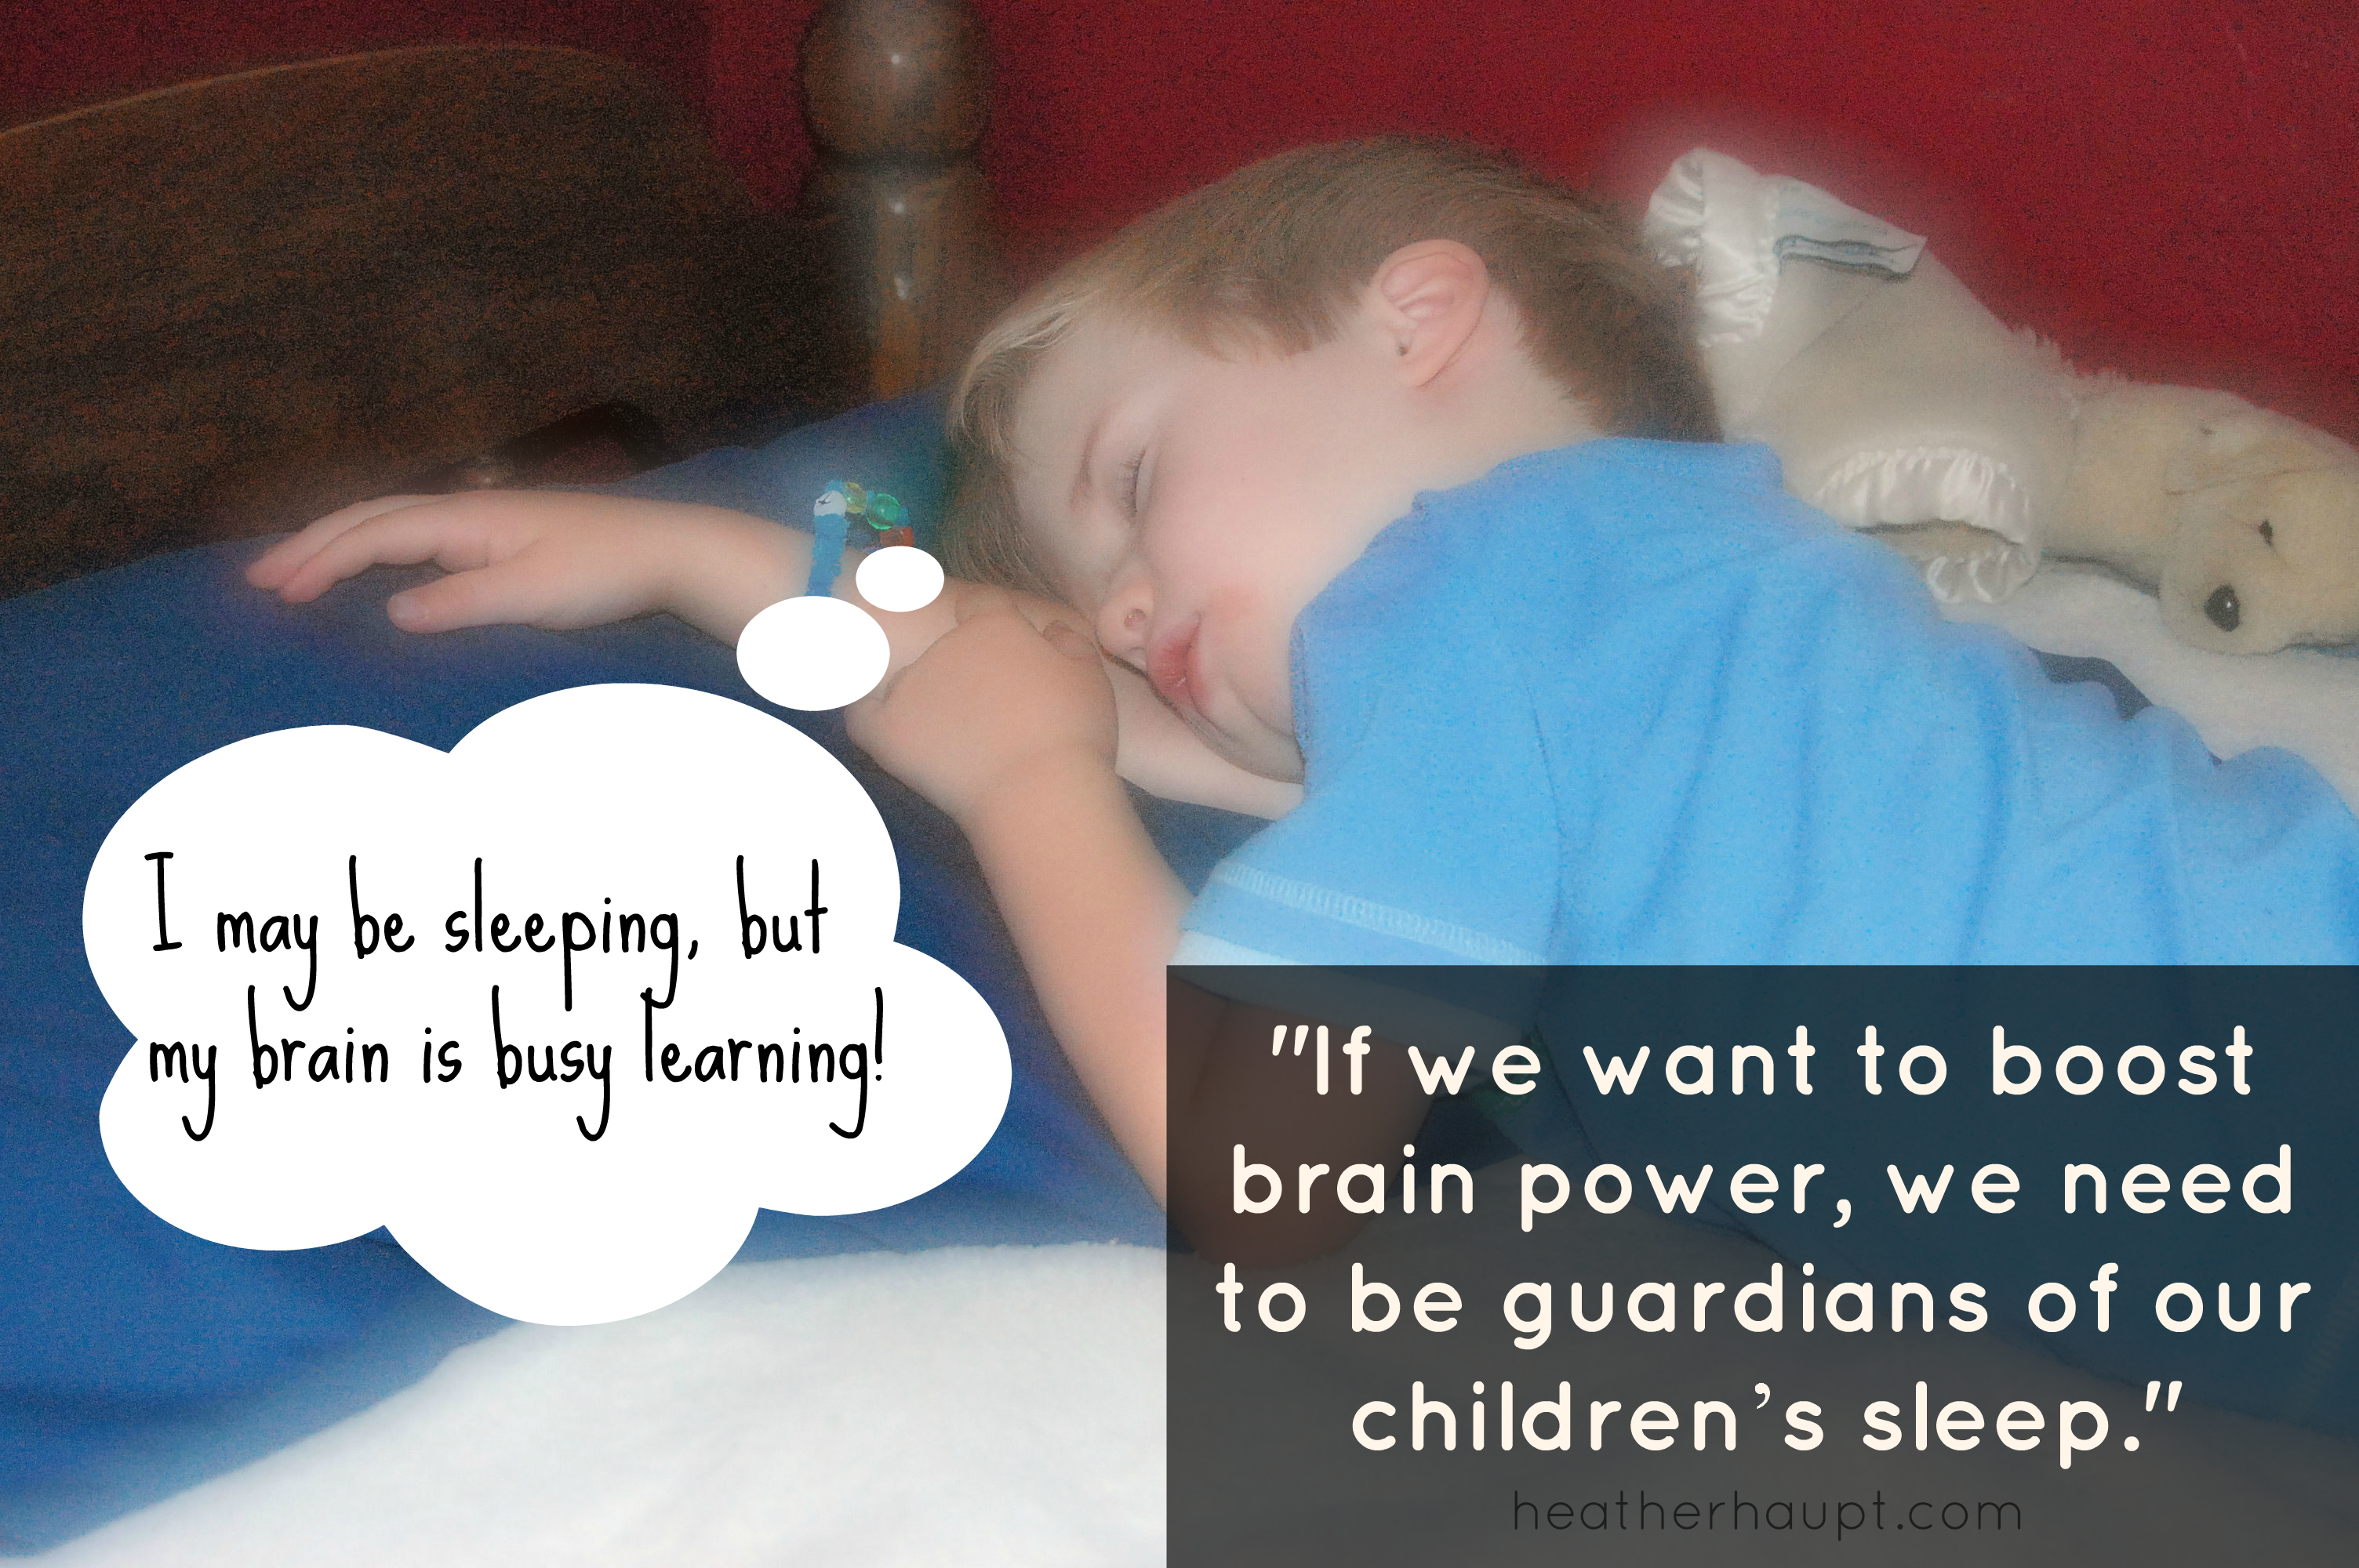 If we want to boost brain power, we need to be guardians of our children’s sleep.   Day 2 of a 10 Day Series on Boosting Brain Power.